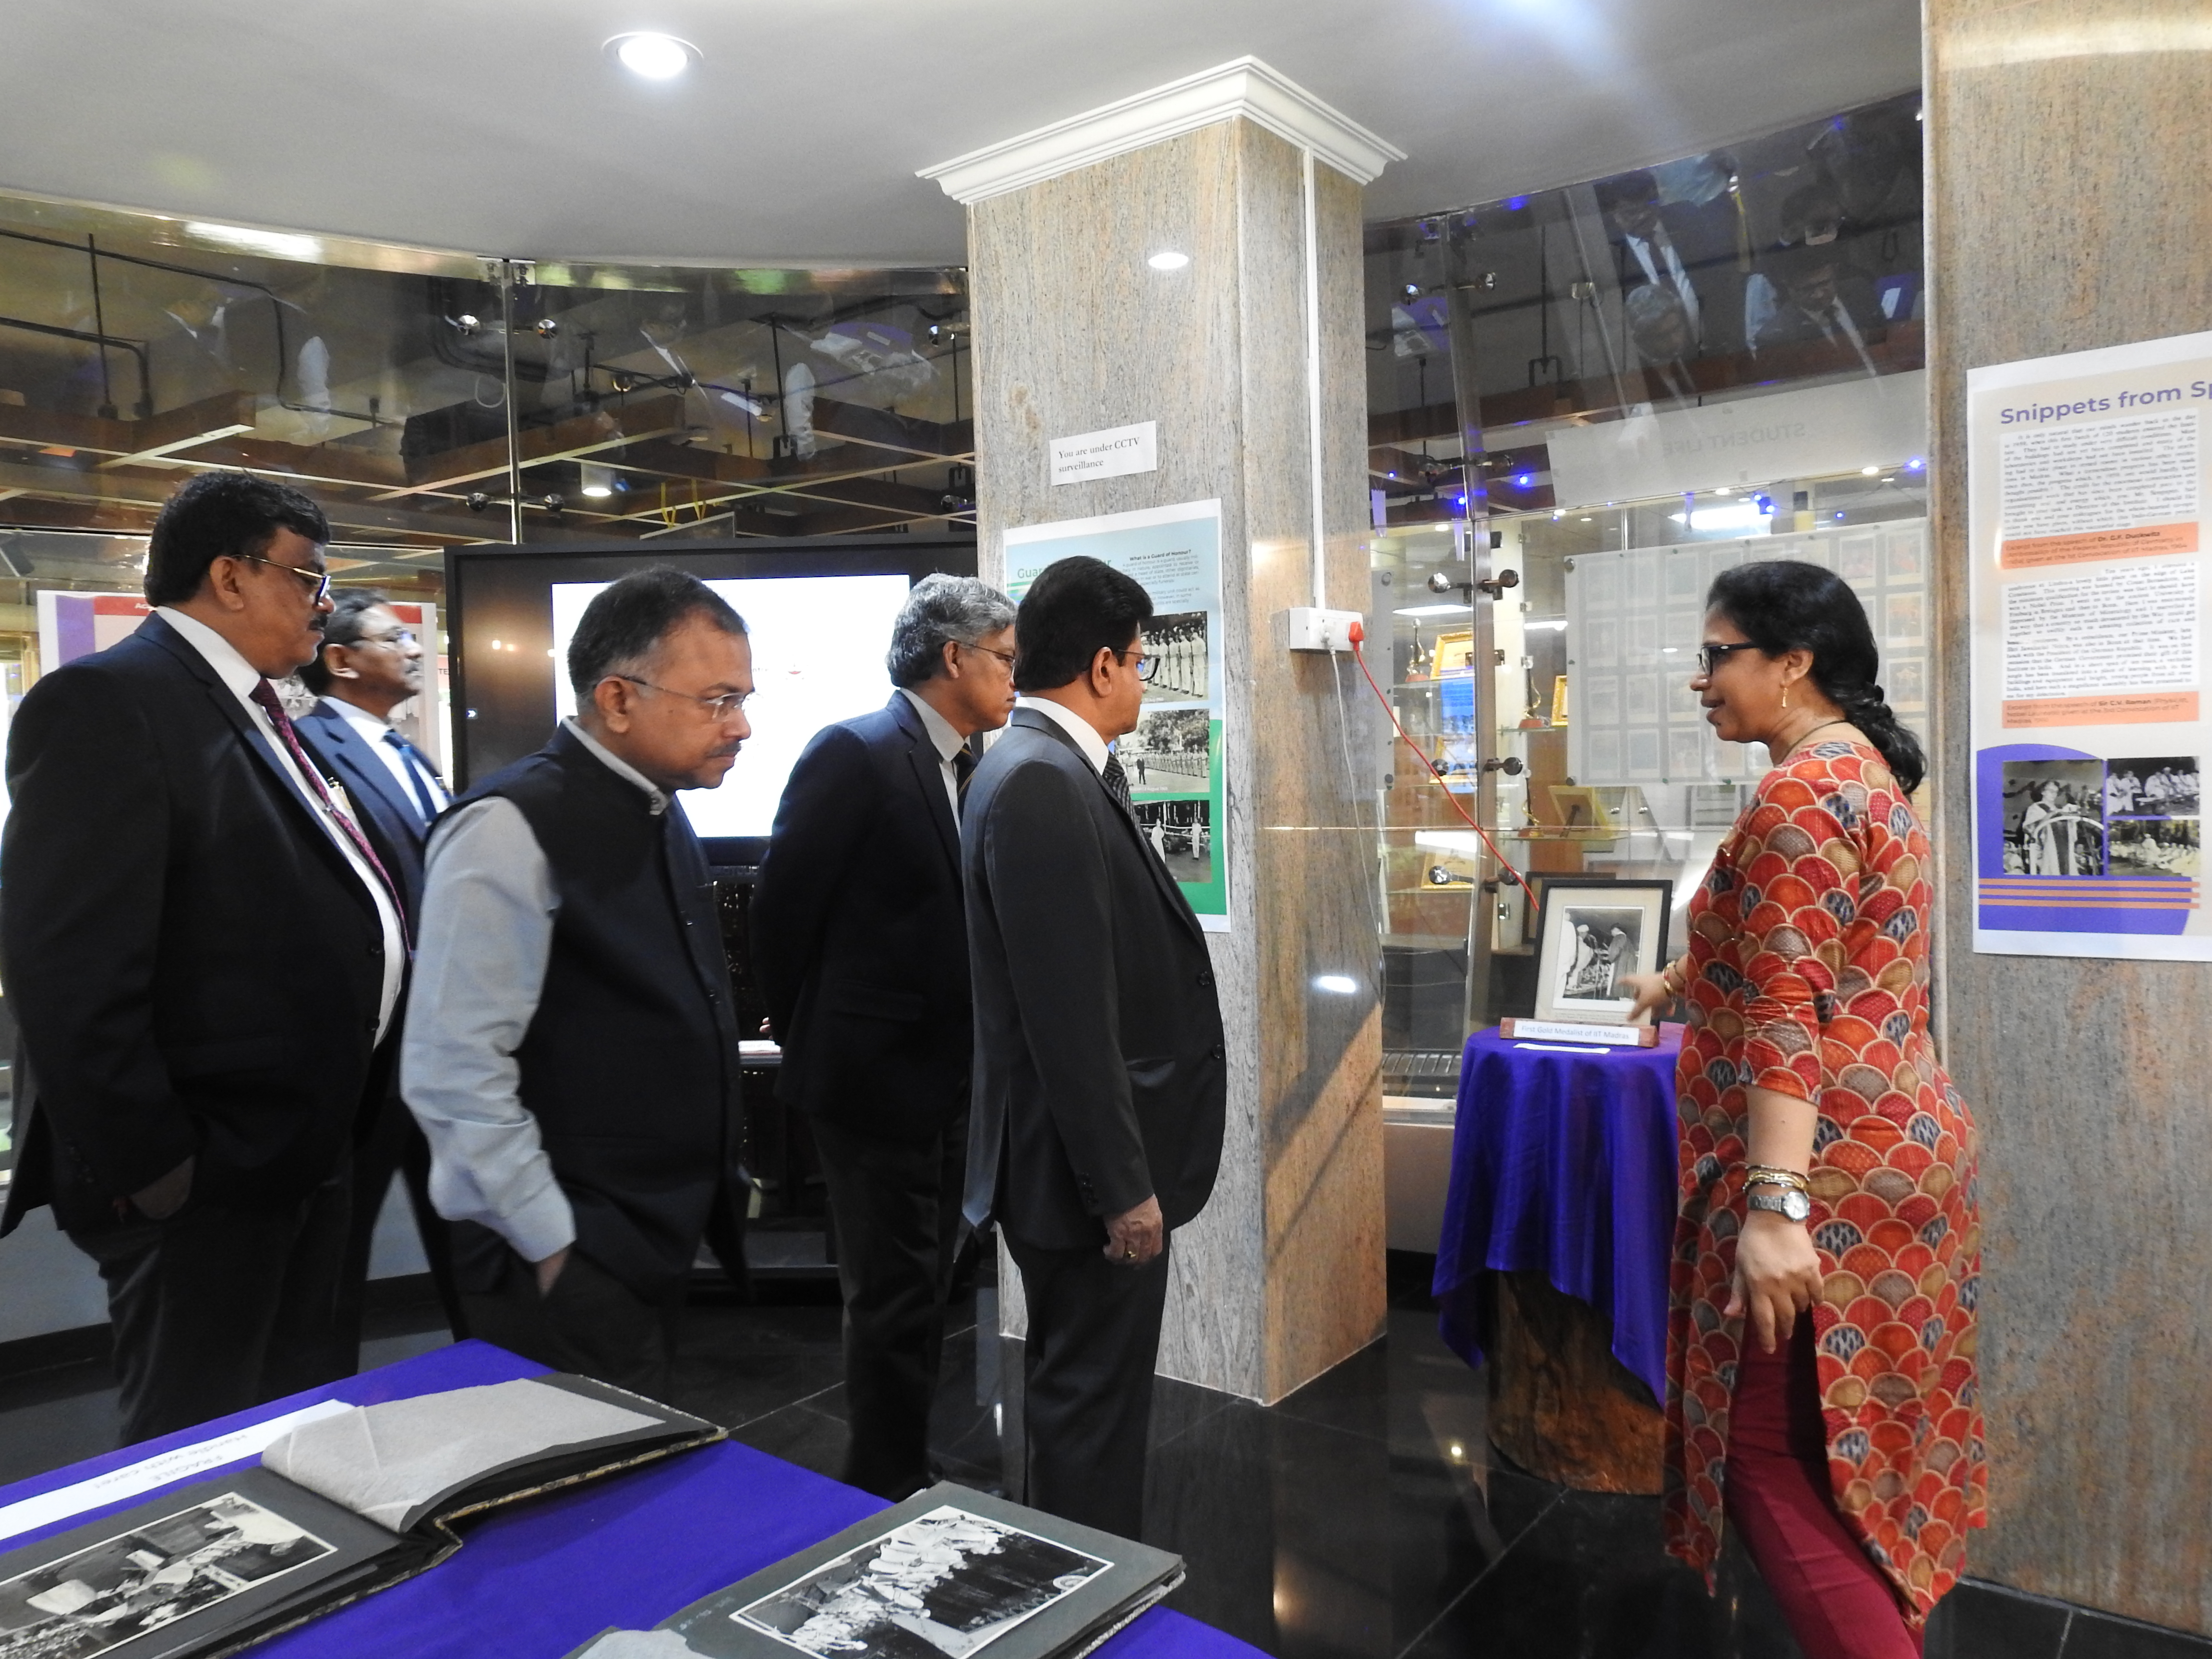 Ms. Mamata Dash (Senior Project Officer) guides Mr. Arvind Kumar and team around the Heritage Centre